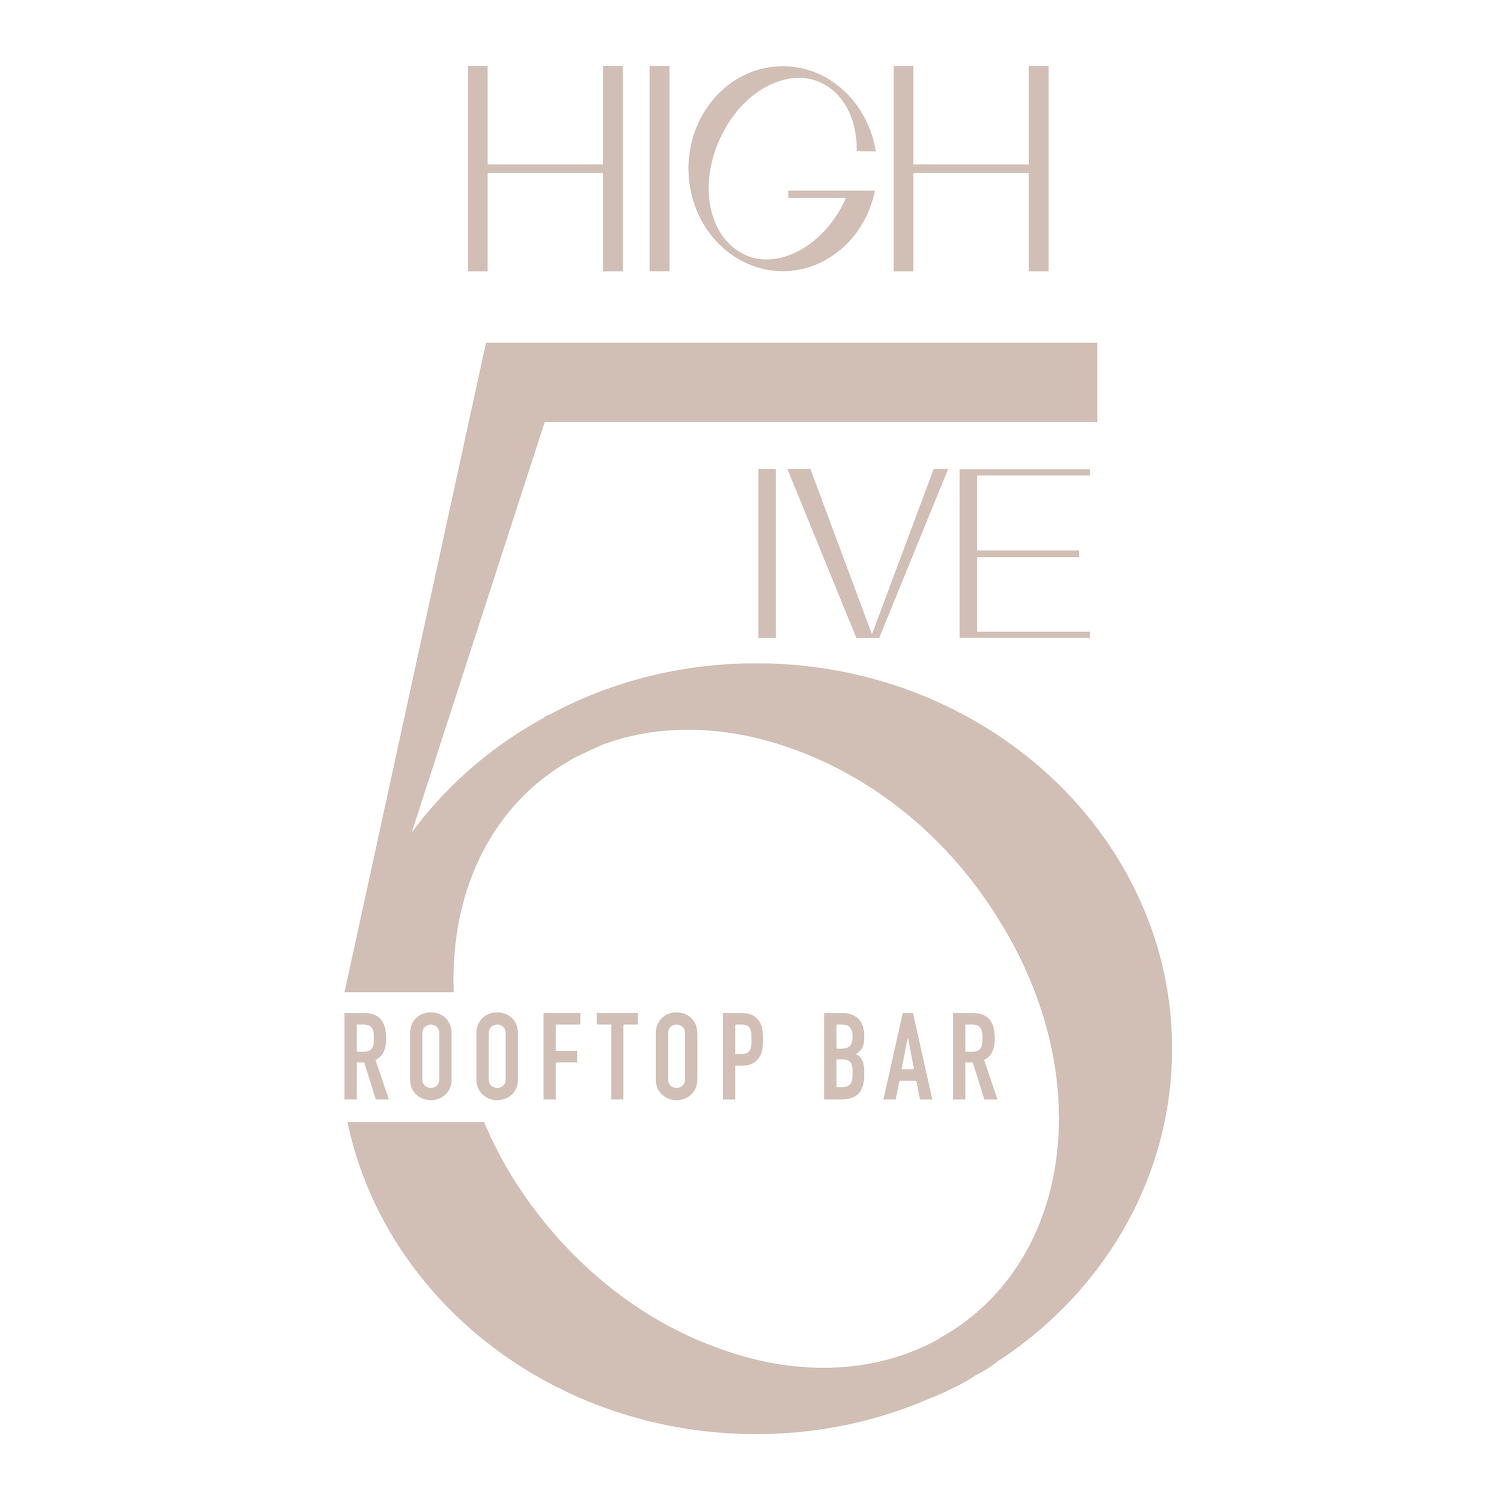 High 5ive Rooftop Bar